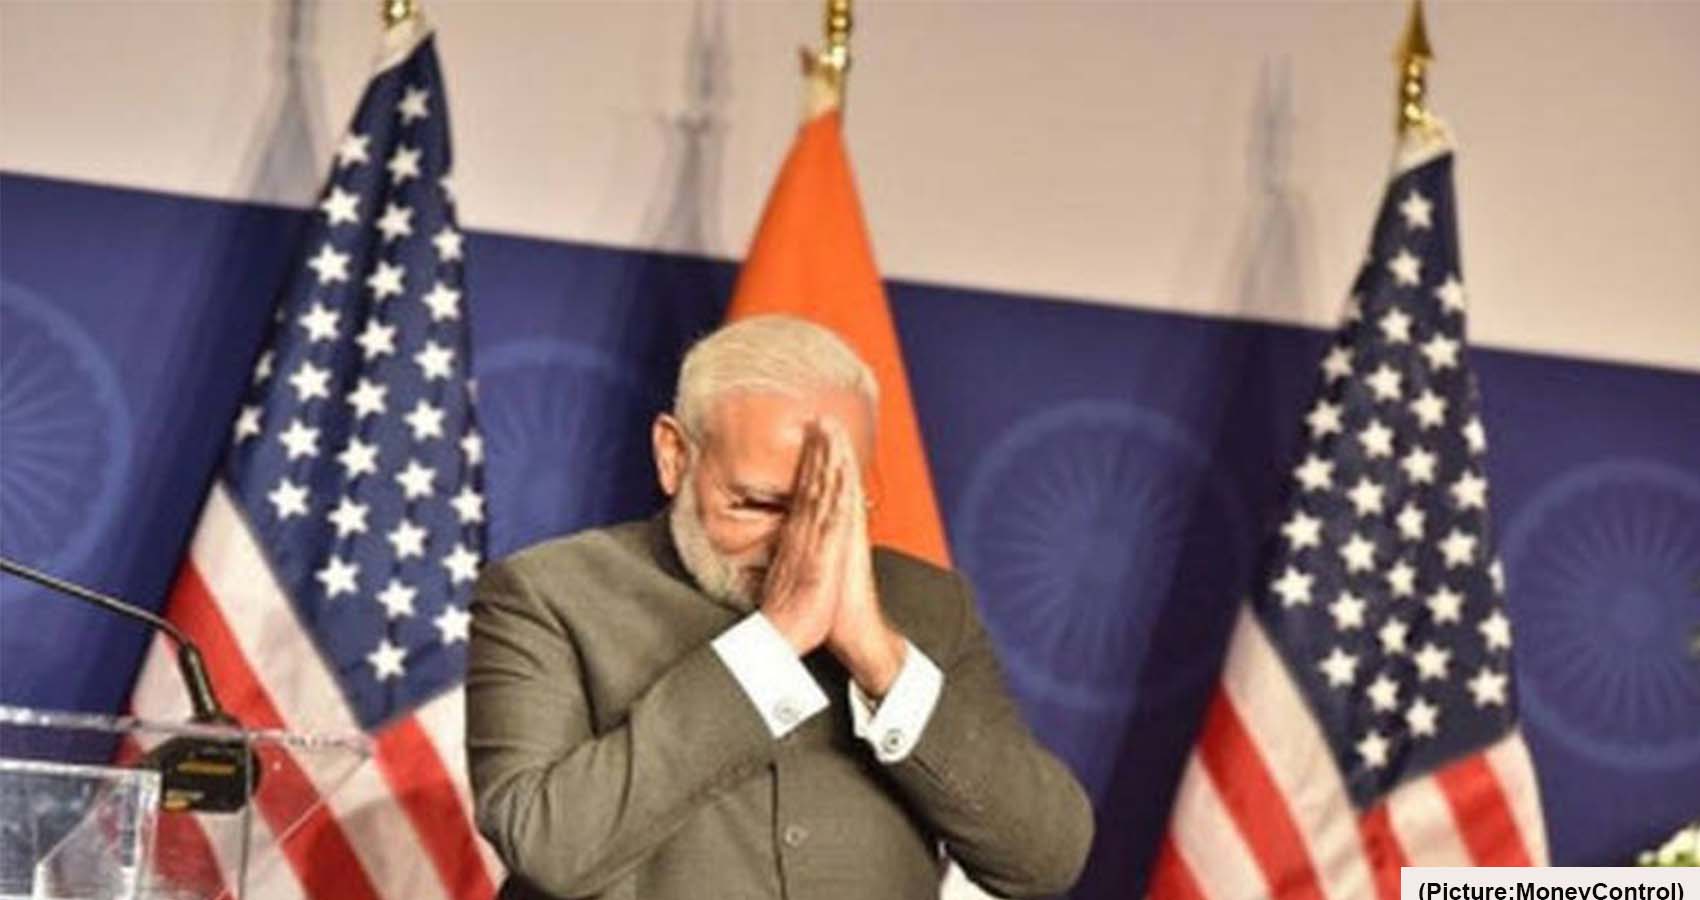 PM Modi Likely To Visit US In September